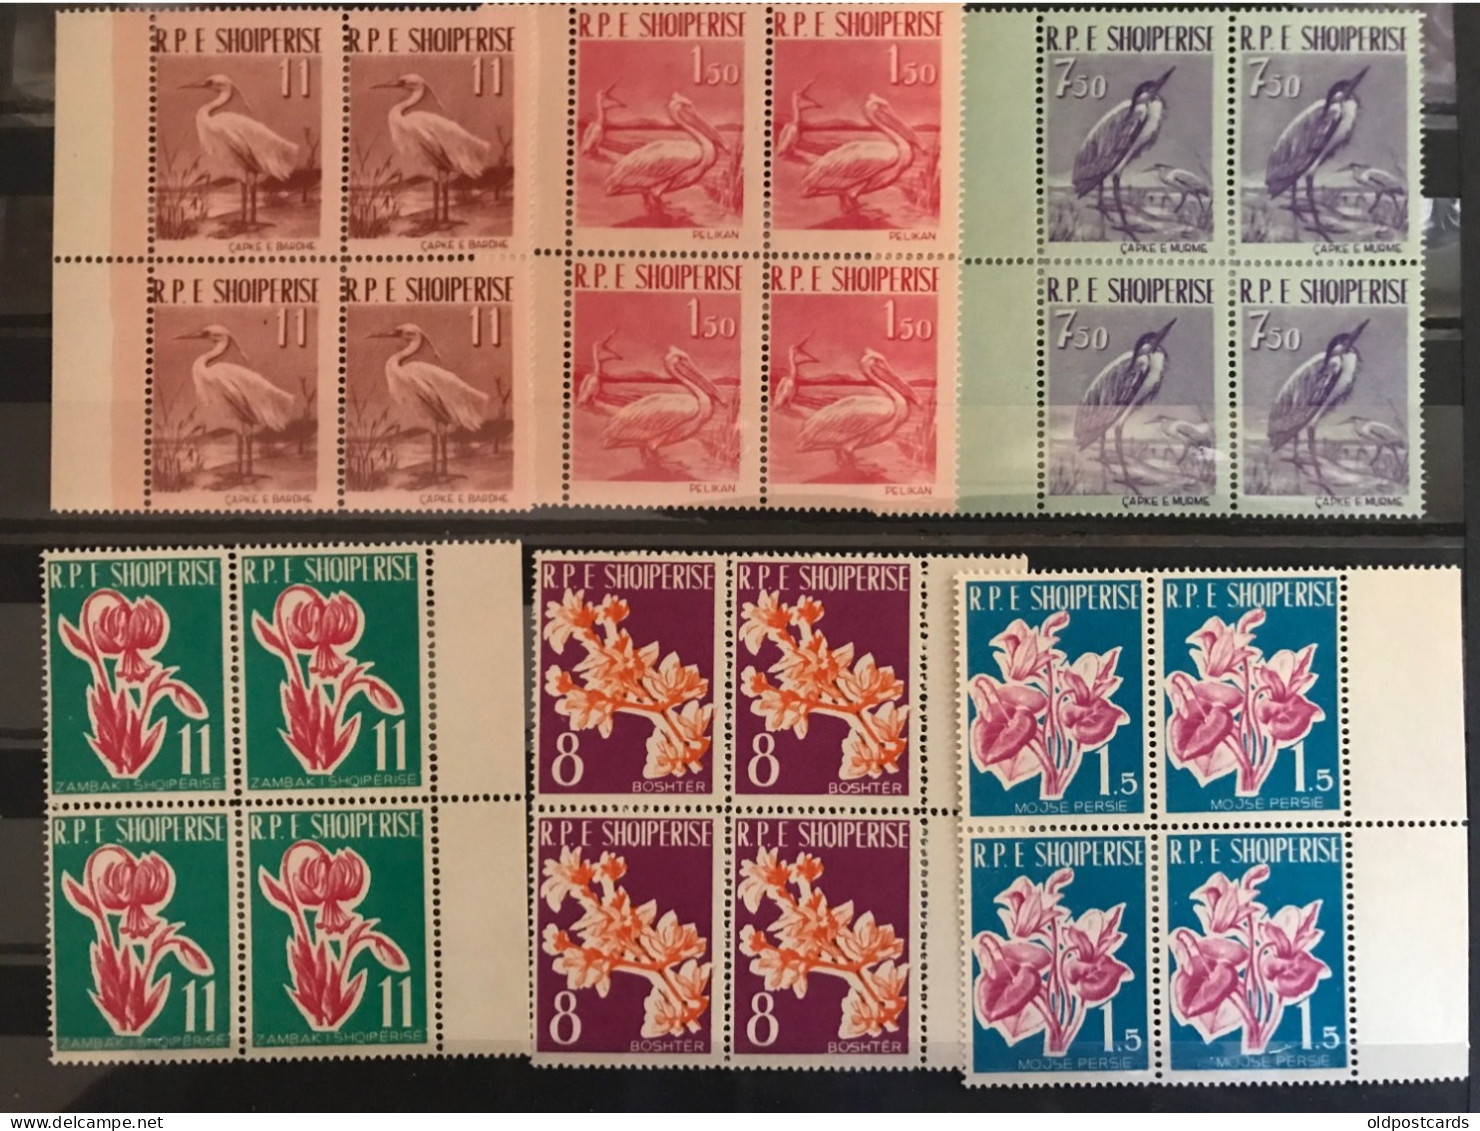 Albanian Postal Stamps Series From The 1961s - Albania